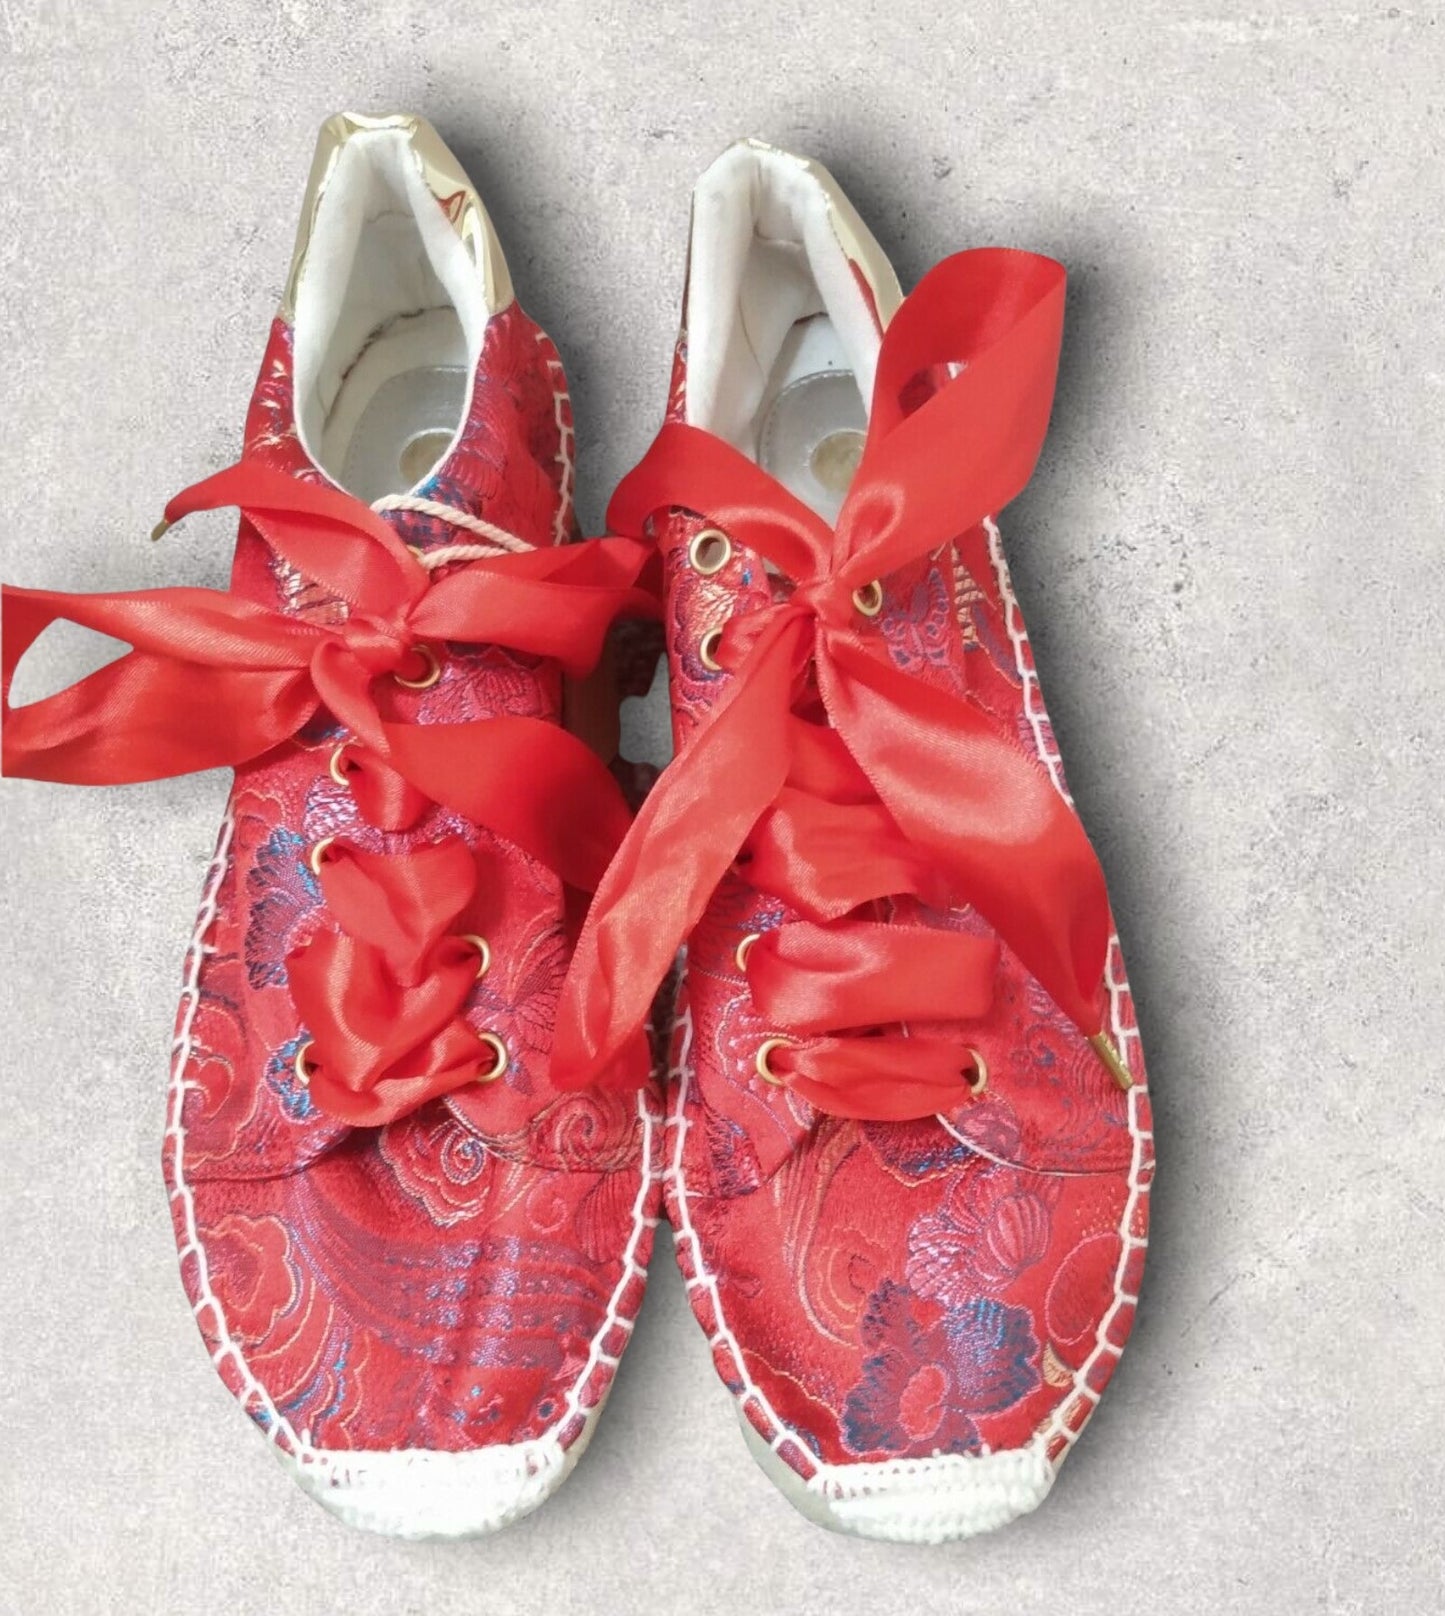 Replay Floral Red Embroidered Orient Box Chinese Espadrilles Trainers UK 7 EU 40 Timeless Fashions